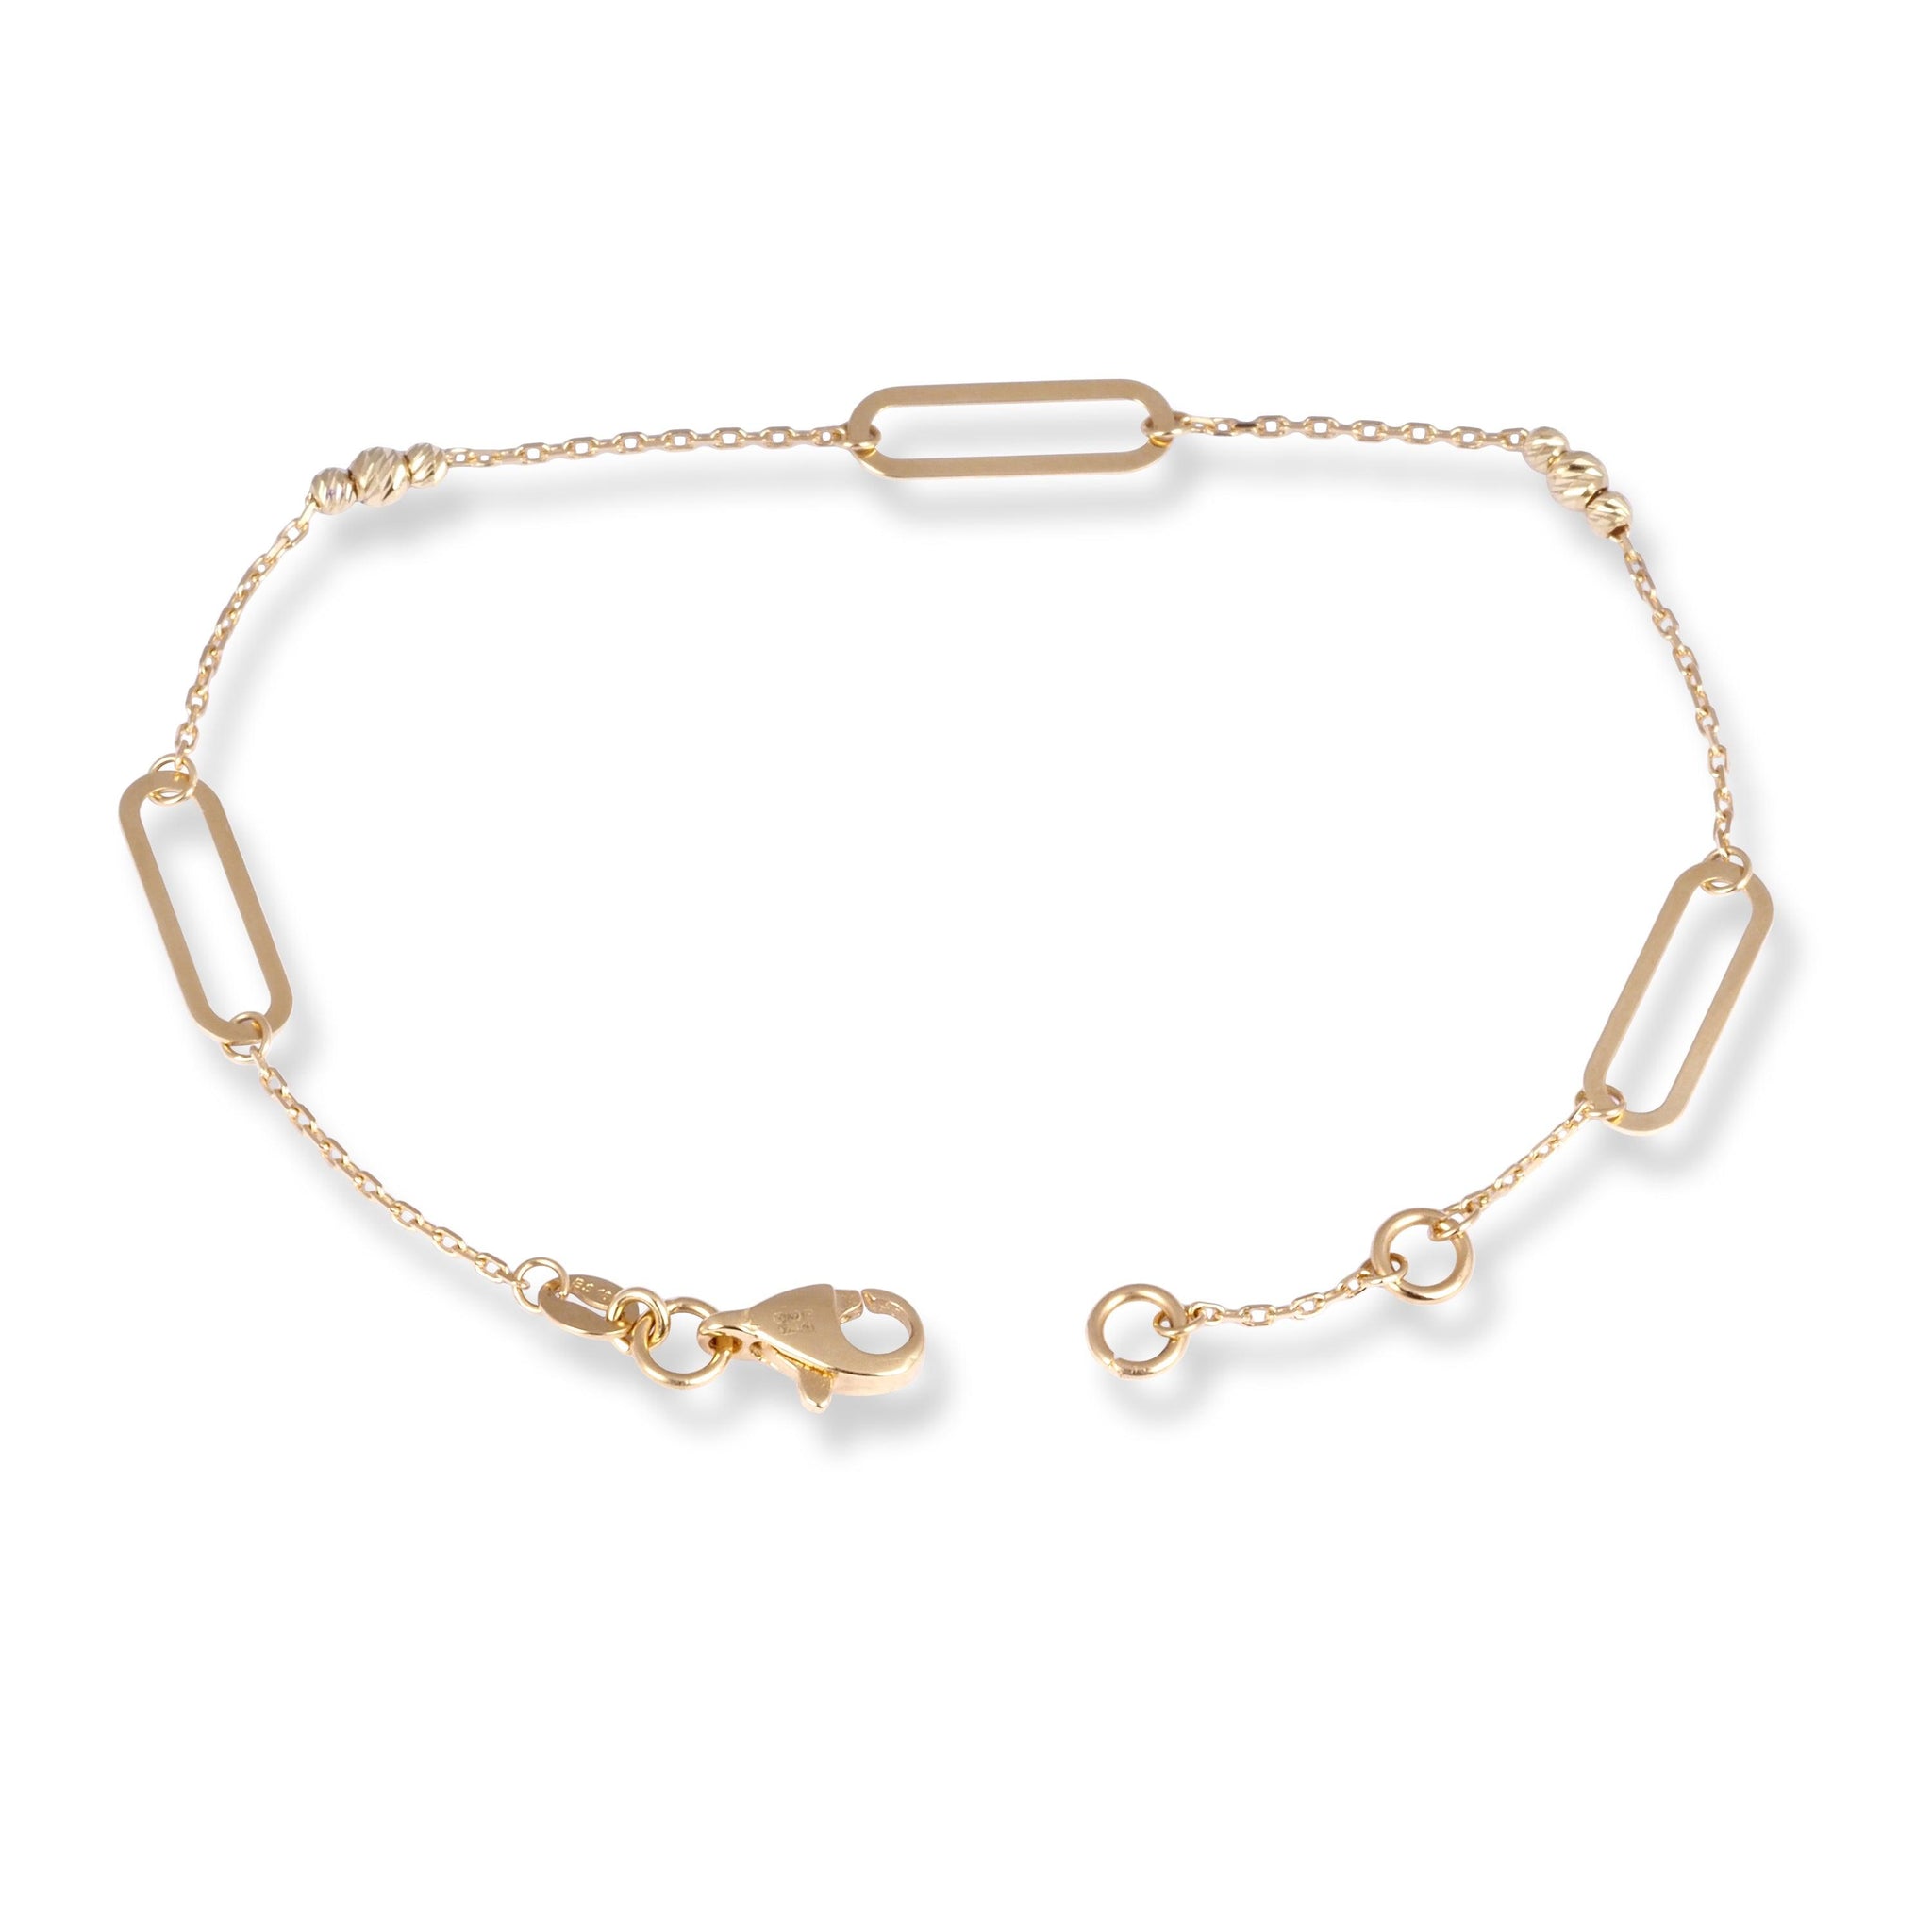 18ct Yellow Gold Bracelet with Links, Beads and Lobster Clasp LBR-8489